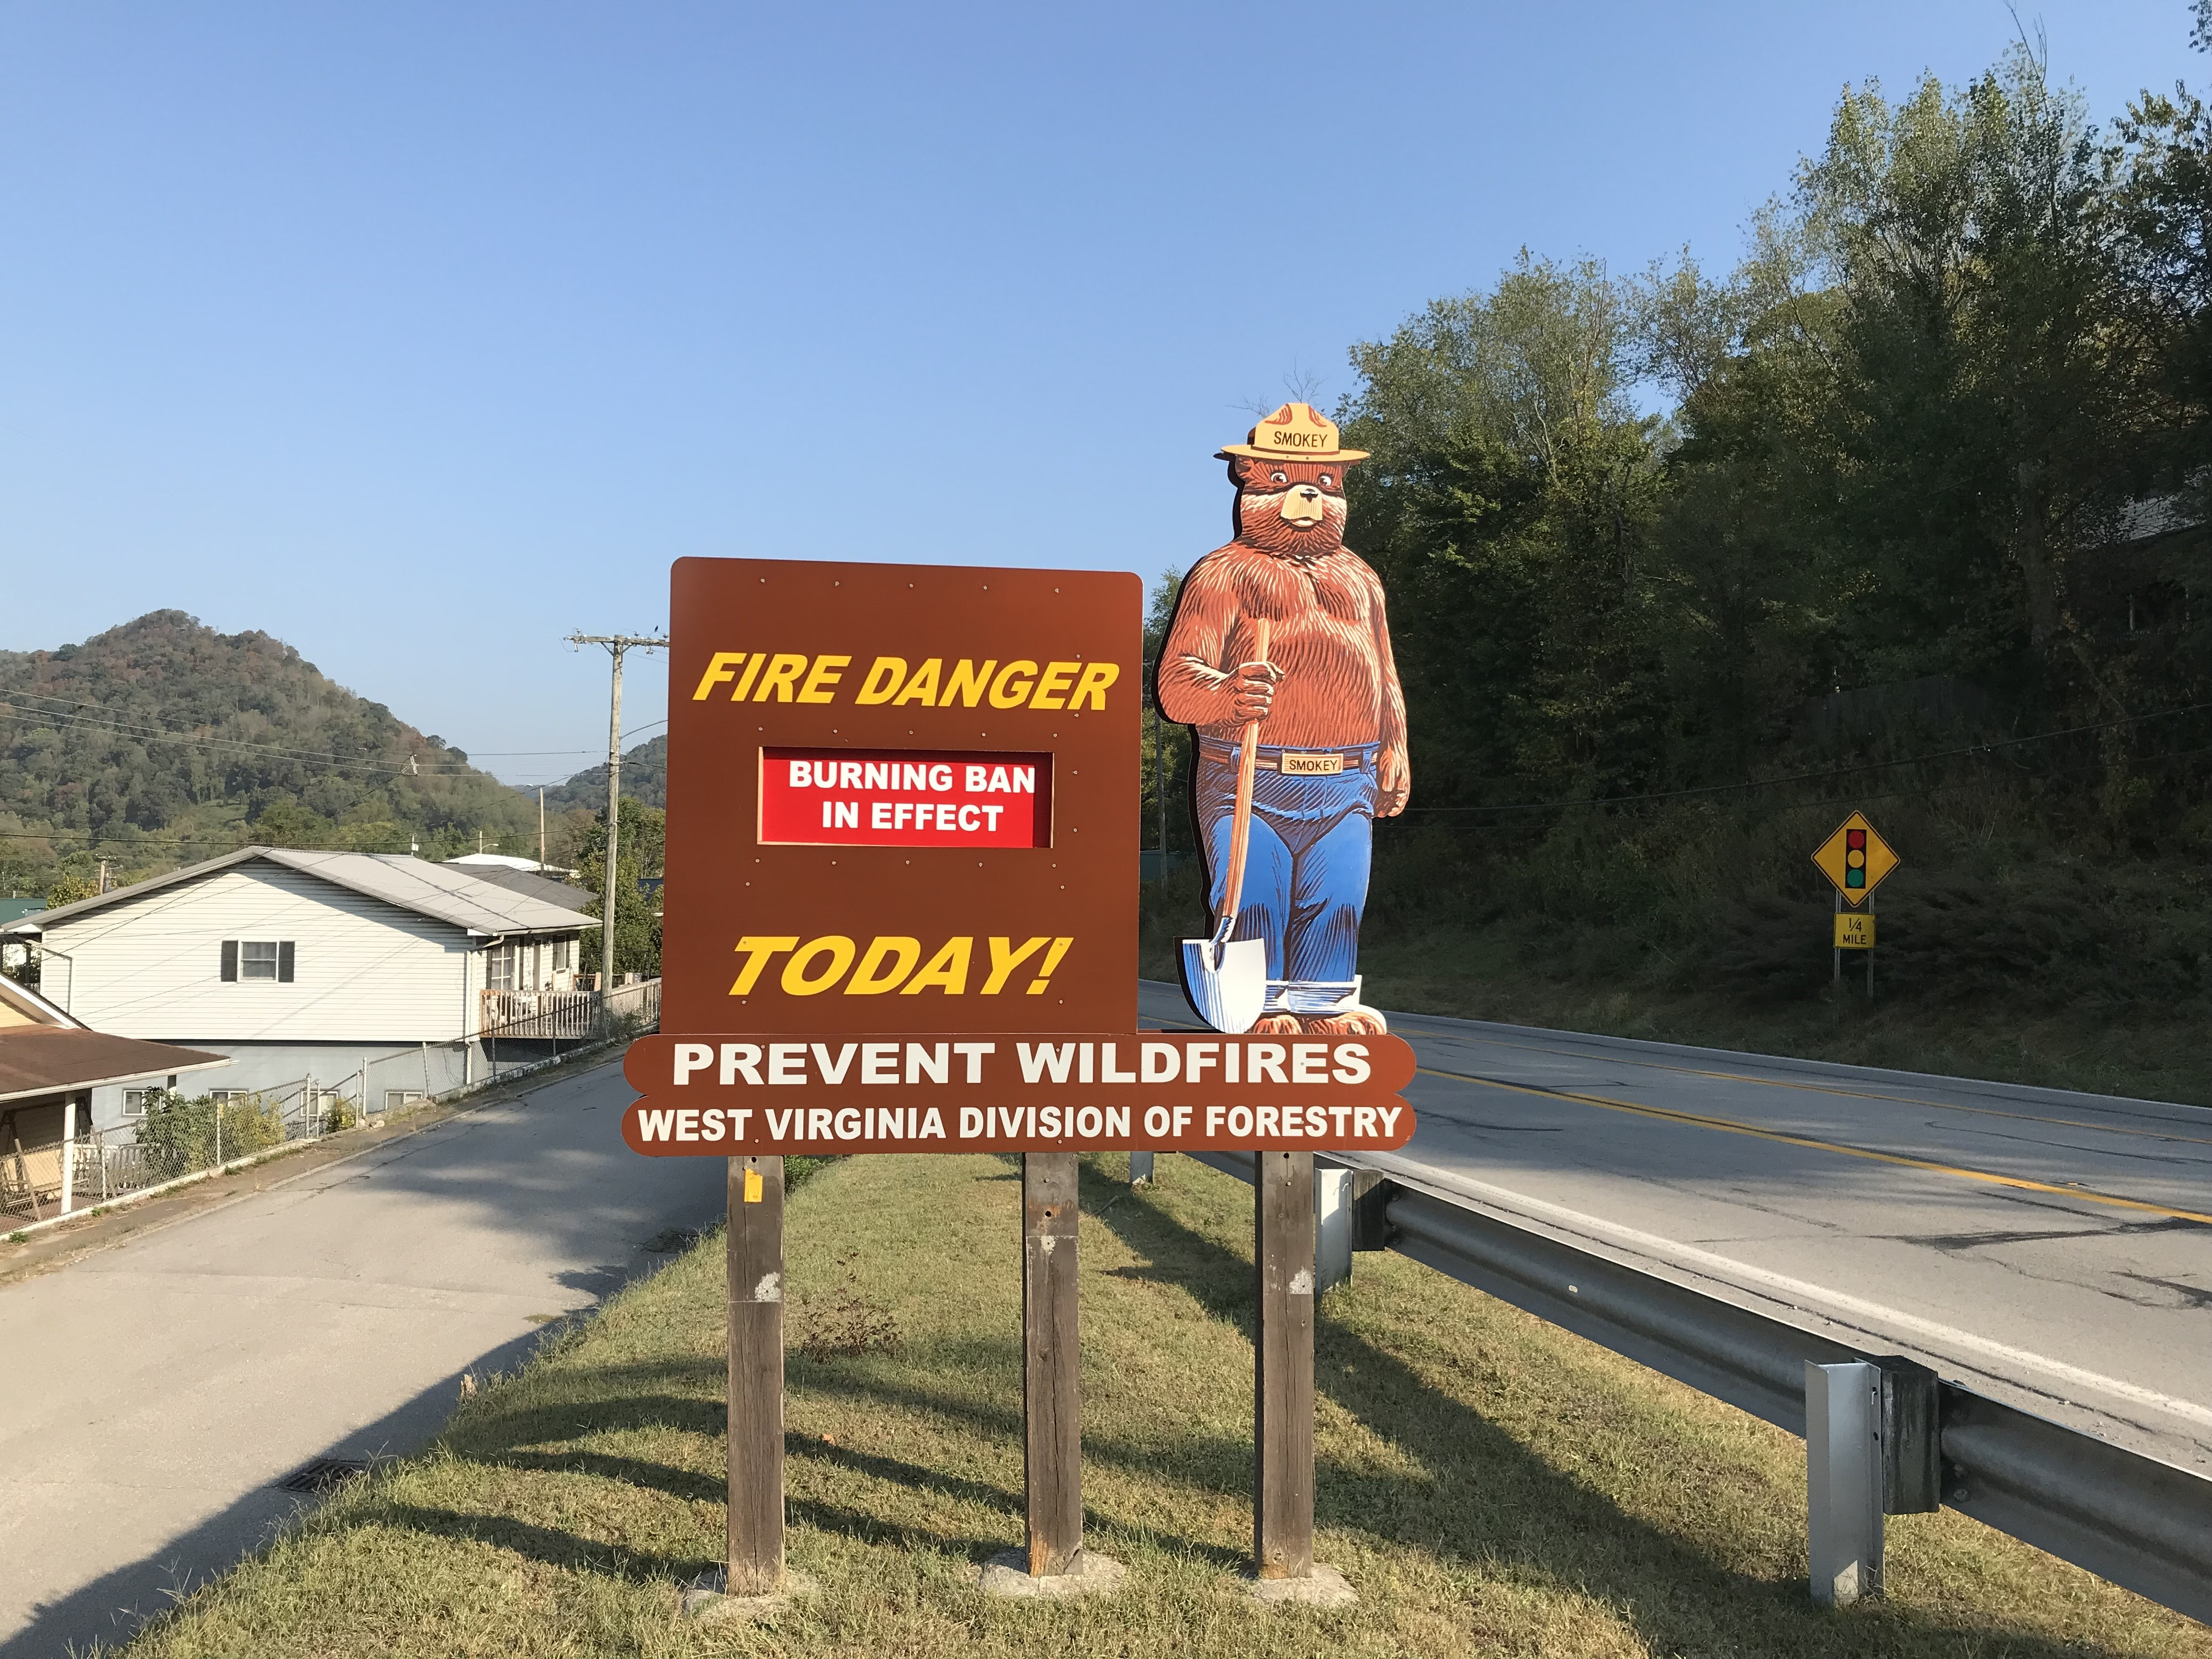 October 1 is the start of fall fire season, West Virginia residents urged to follow burning guidelines